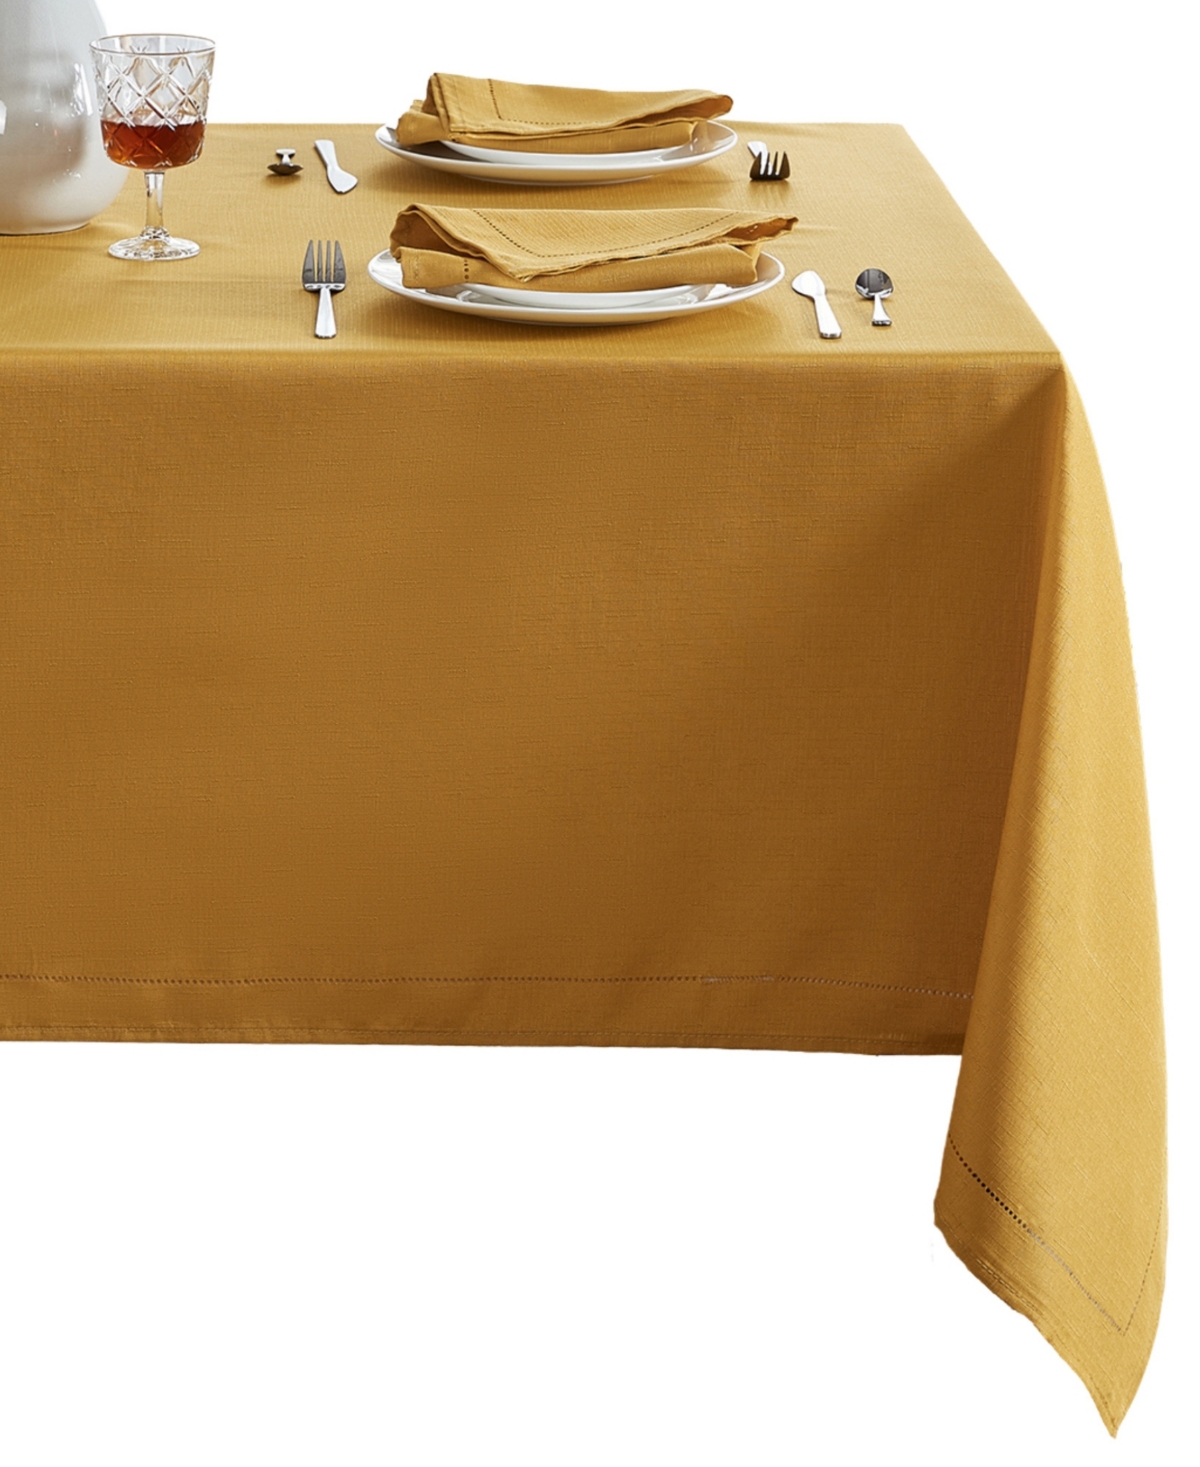 Elrene Alison Eyelet Punched Border Fabric Tablecloth, 52" X 70" In Golden Yellow